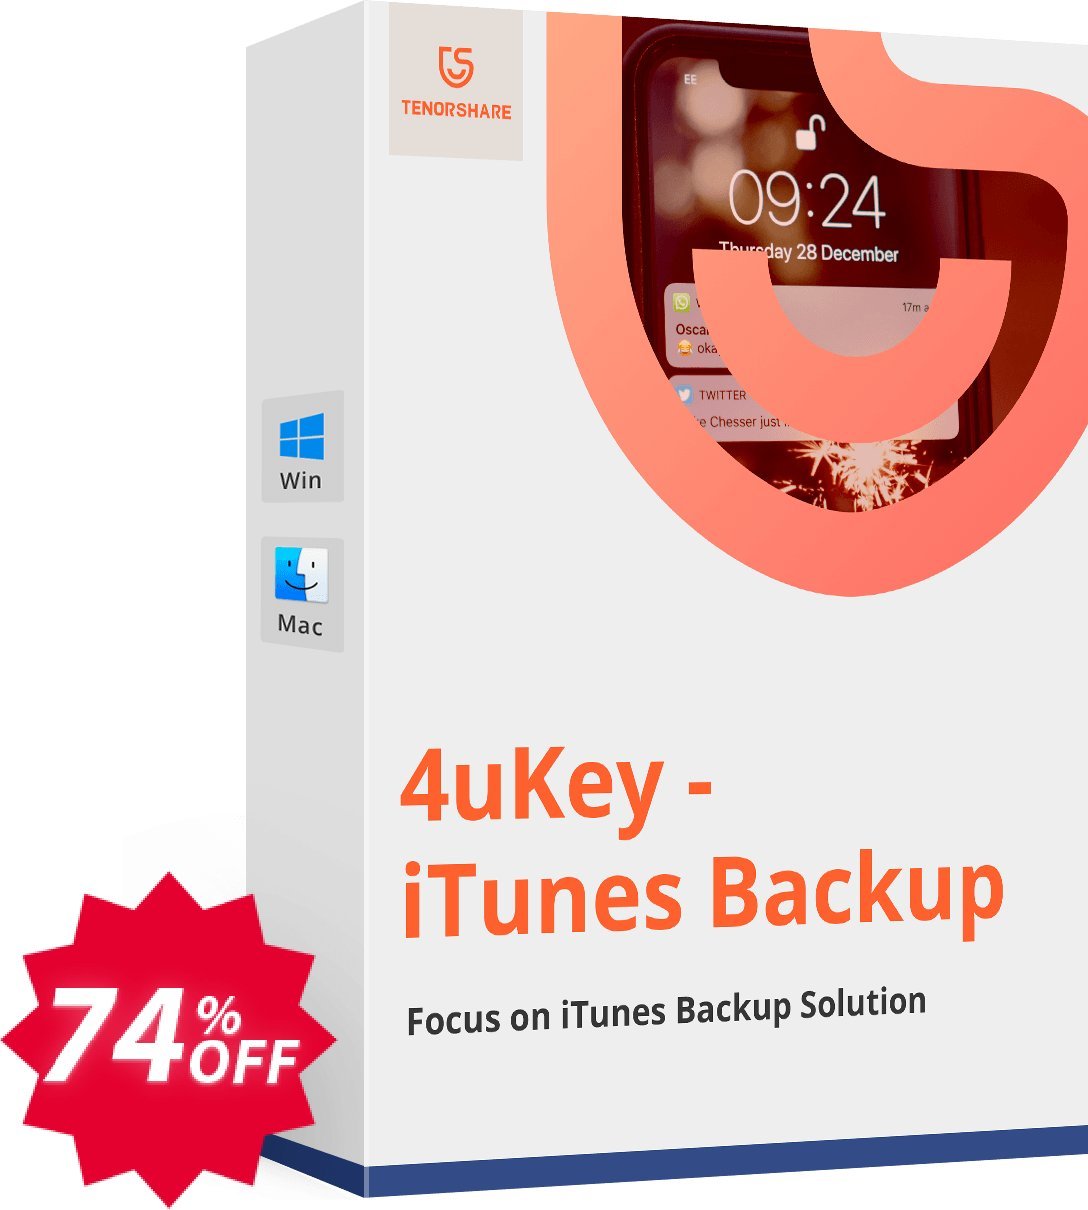 Tenorshare 4uKey iTunes Backup, Yearly Plan  Coupon code 74% discount 